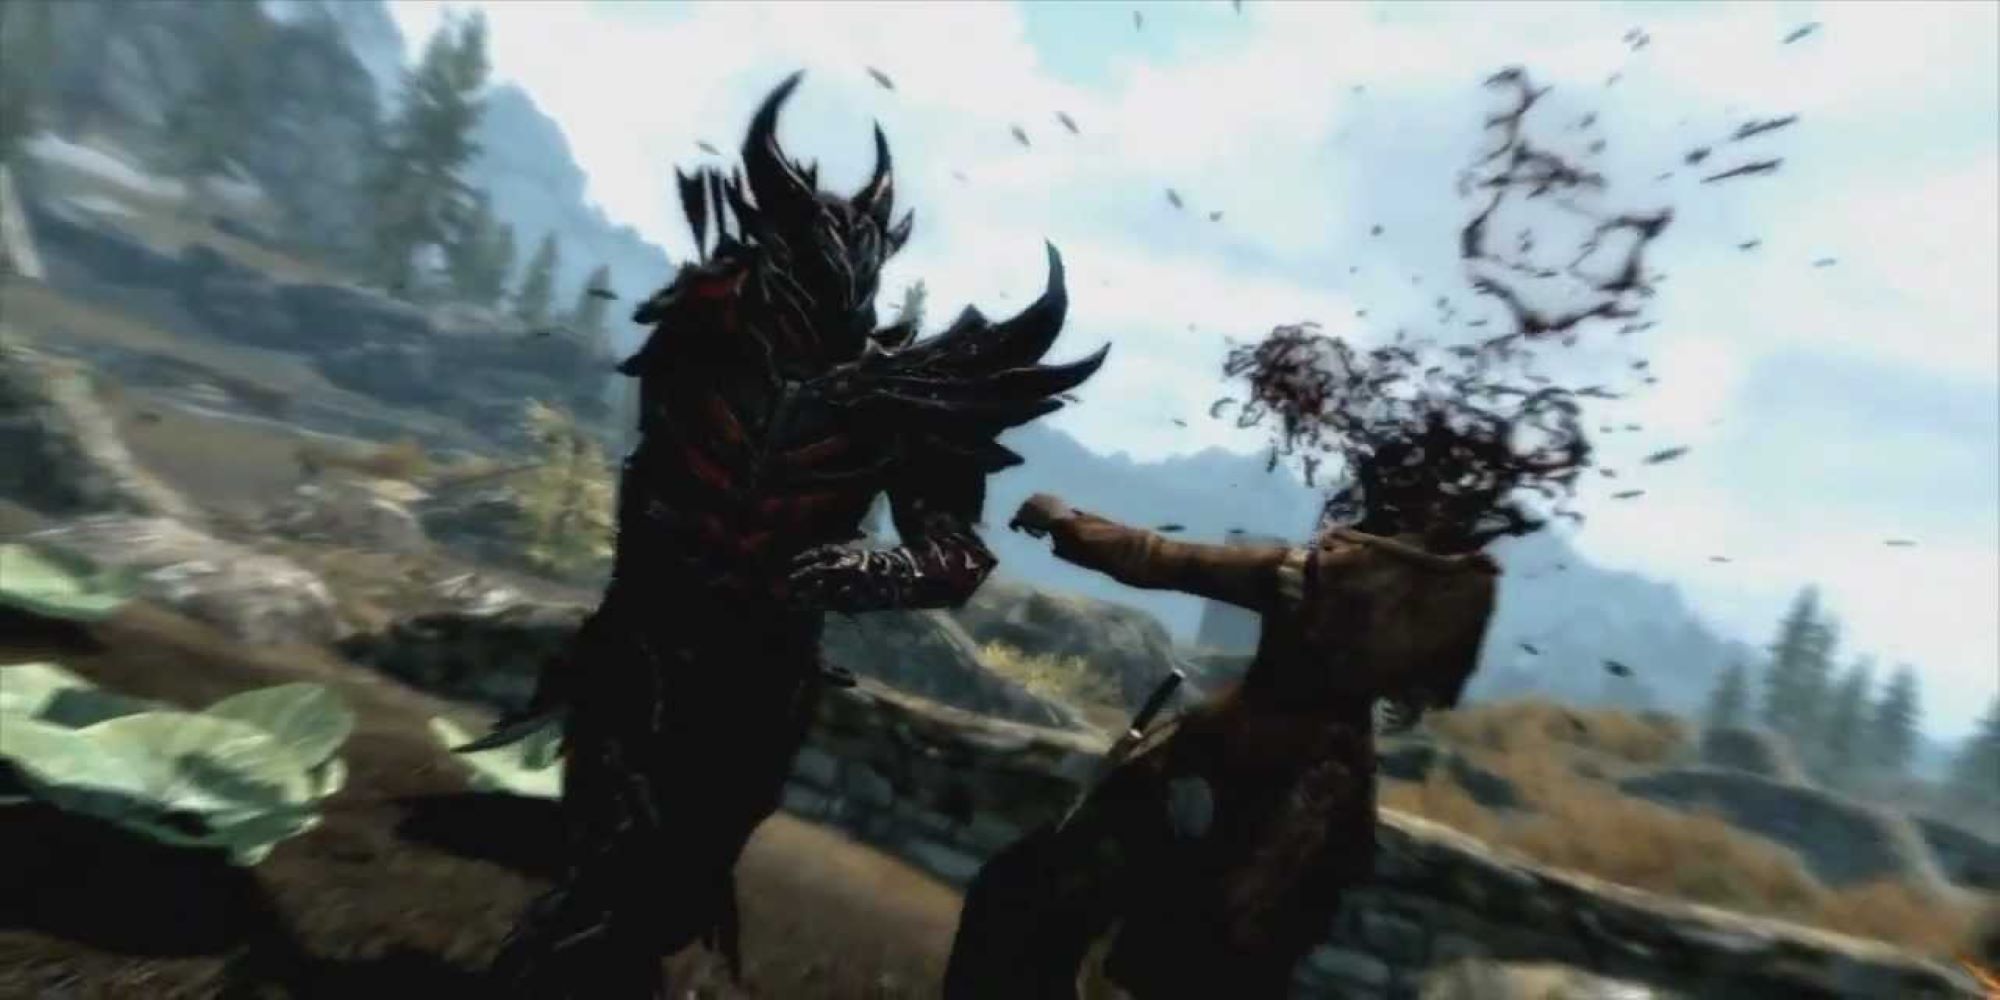 Beheading in Skyrim with Blood Spilling Out